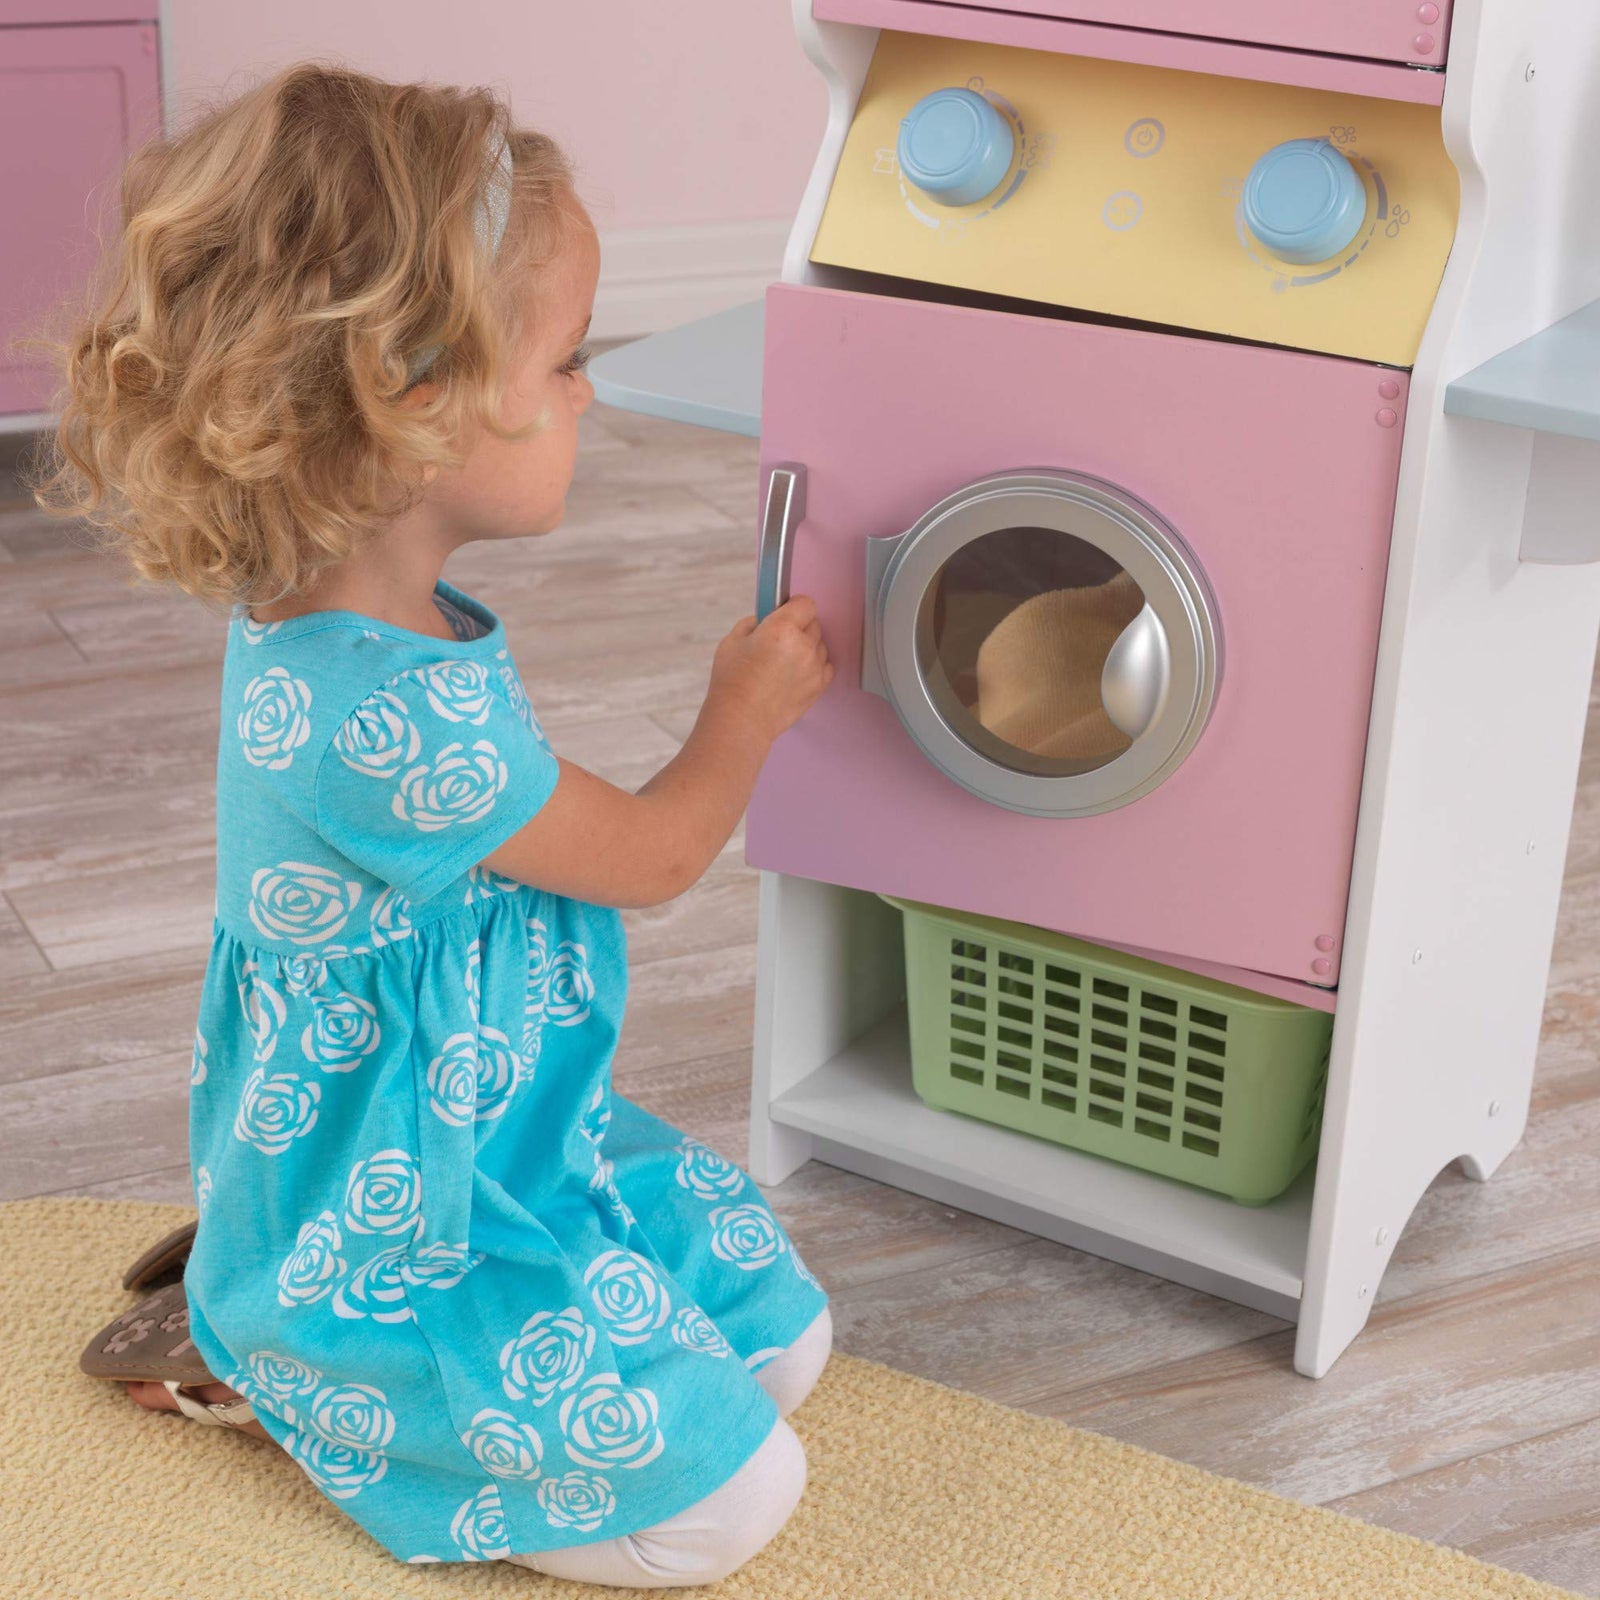 KidKraft Laundry Playset Children's Pretend Wooden Stacking Washer and Dryer Toy with Iron and Basket, Pastel, Gift for Ages 3+